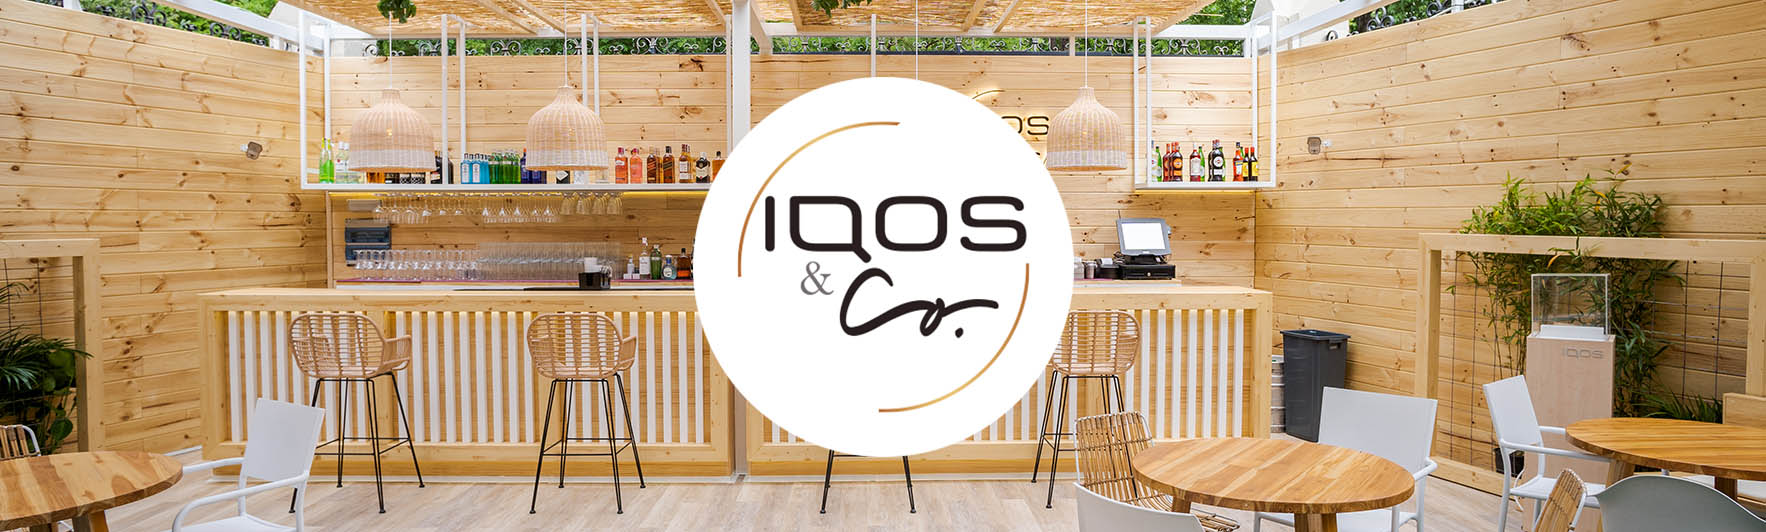 IQOS and CO terrace with logo